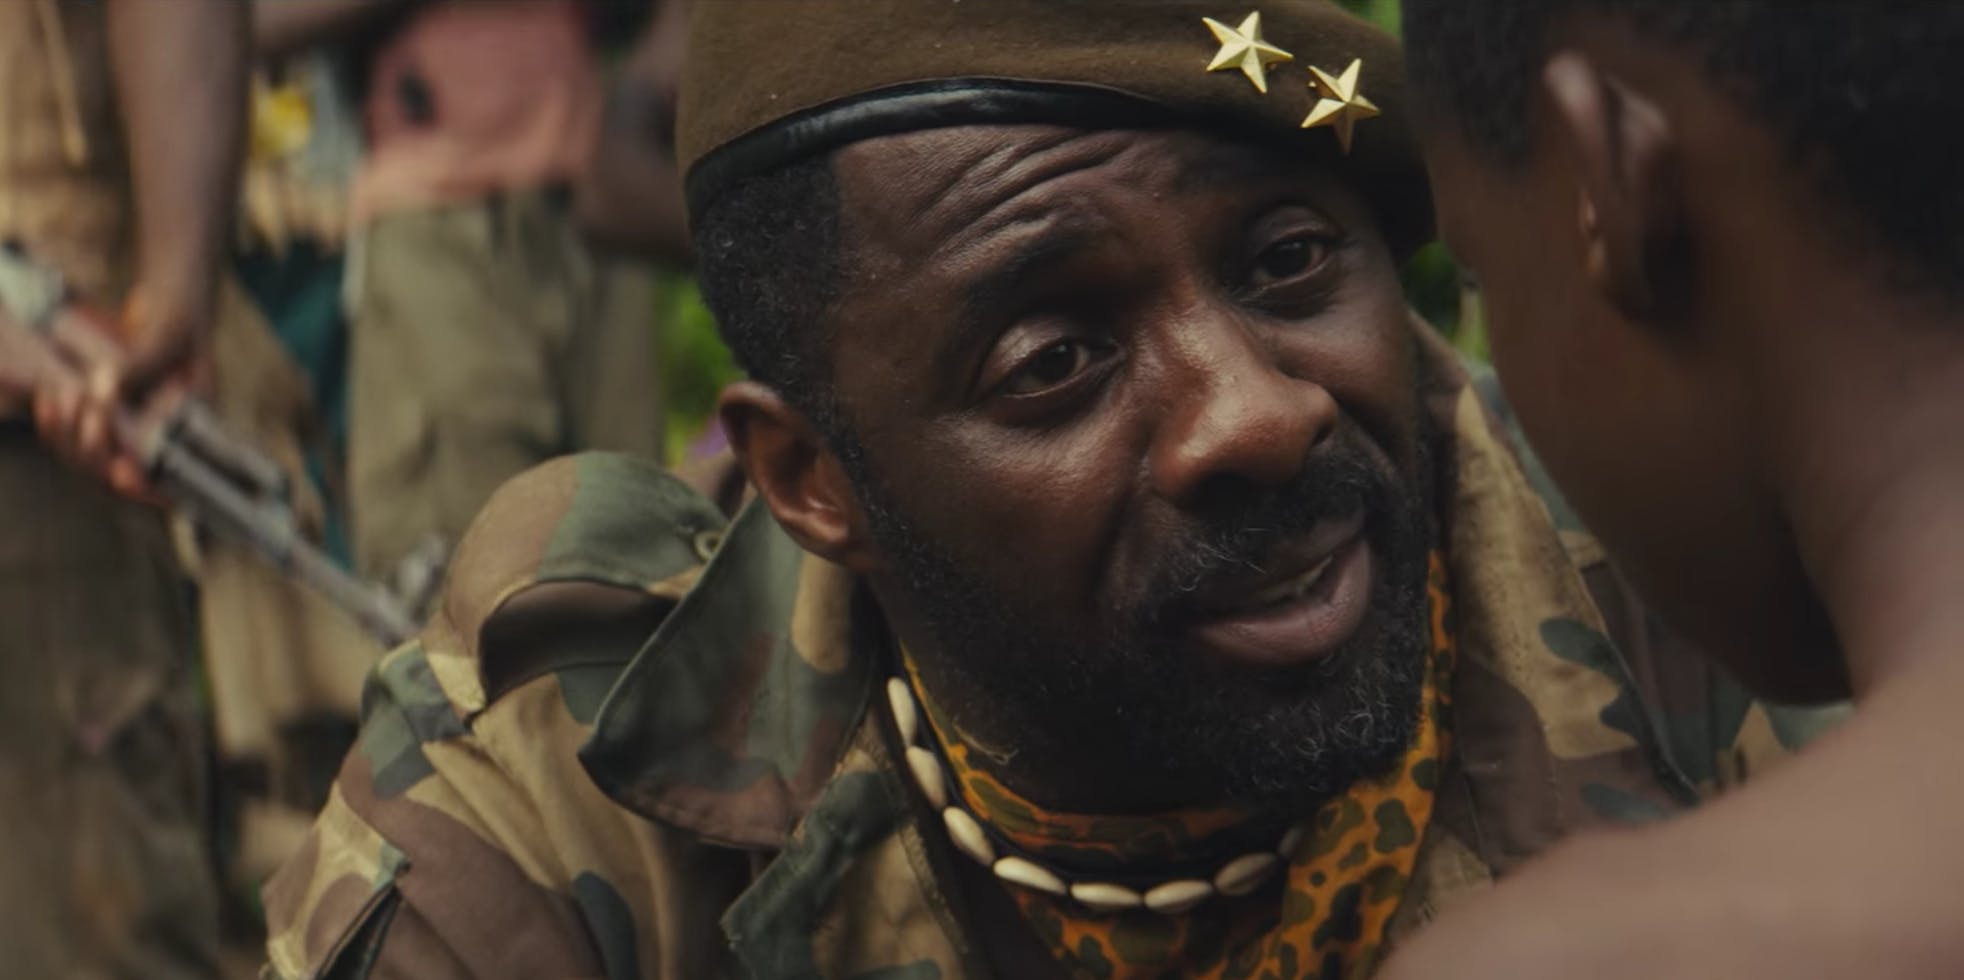 Best movies on Netflix: Beasts of No Nation